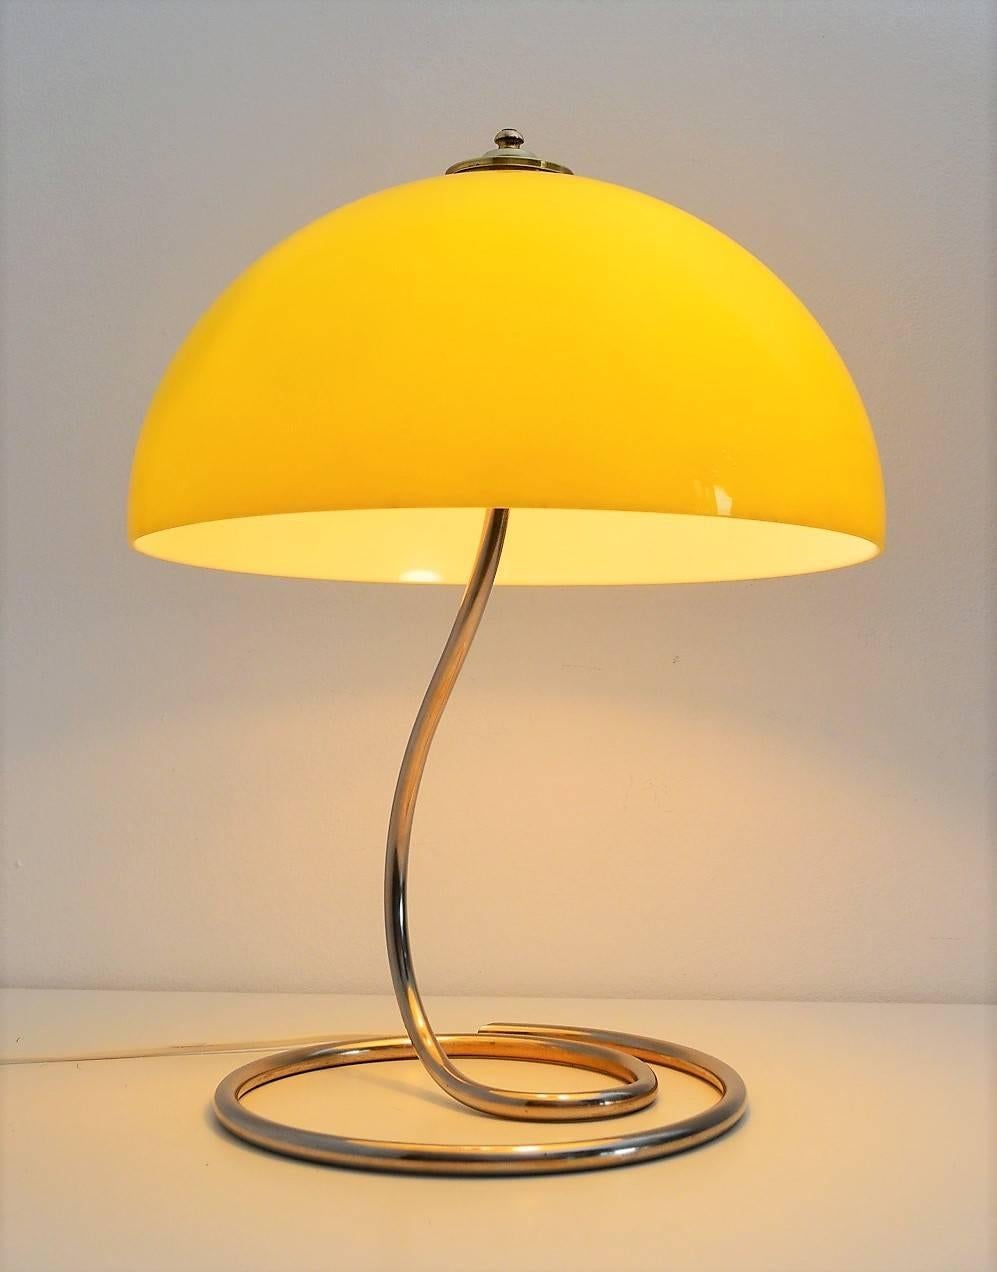 Beautiful and rare Space Age table or desk lamp with acrylic hood in shiny yellow color. Very Pop style.
The lamp is made of a strong full brass lamp stand and a big hood made of shiny yellow acrylic with brass decoration on the top.
Inside the